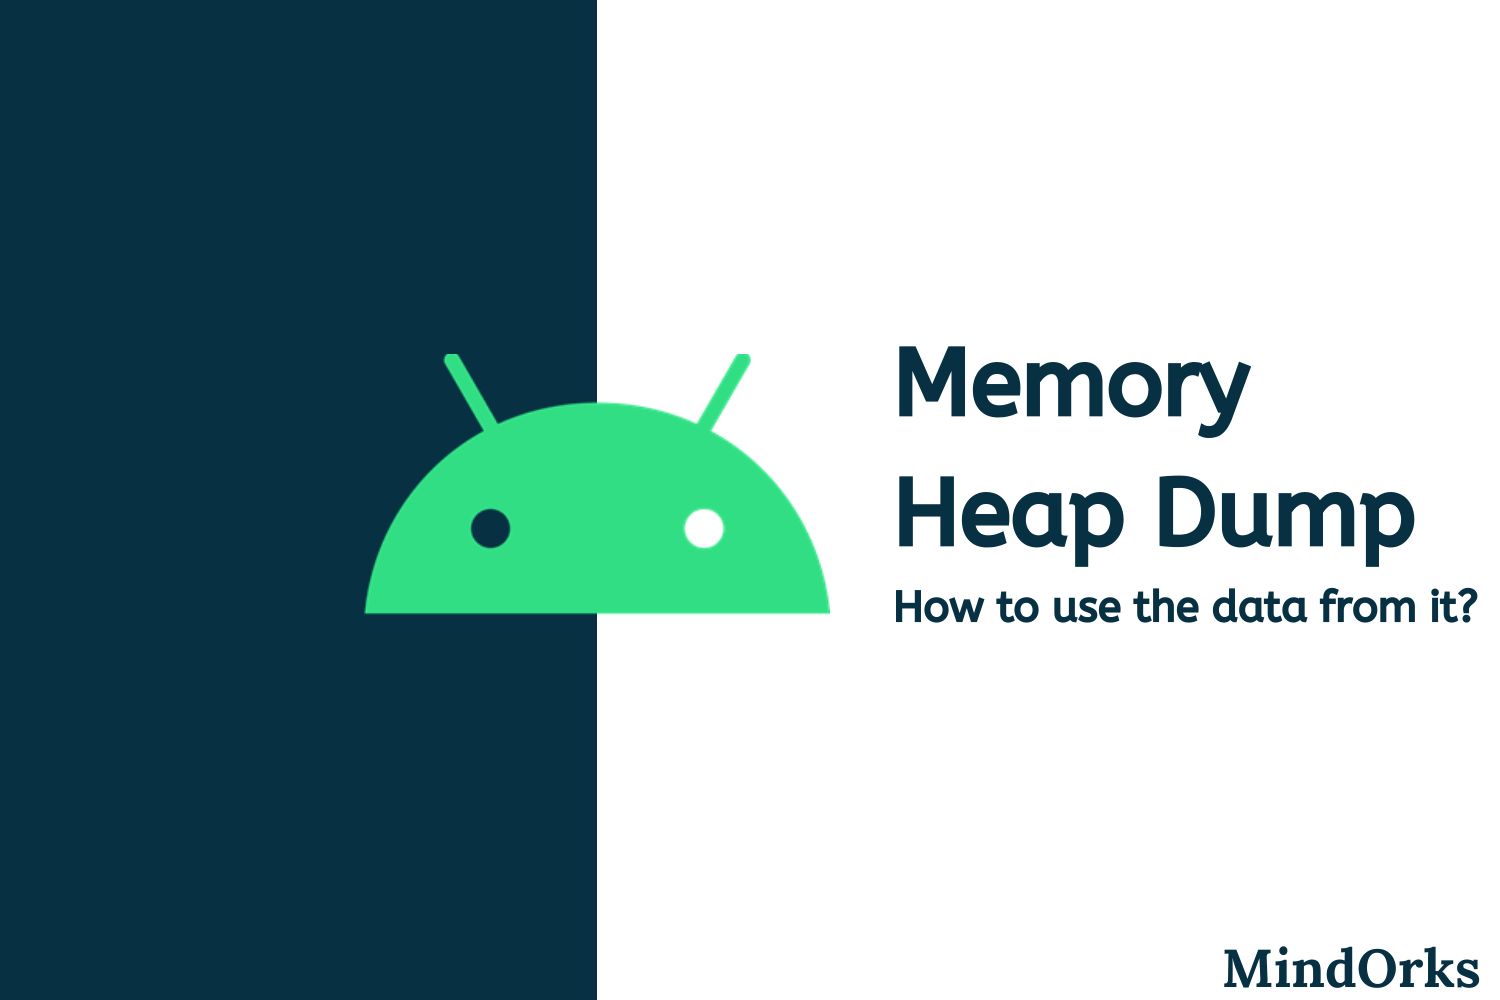 How to use Memory Heap Dumps data?